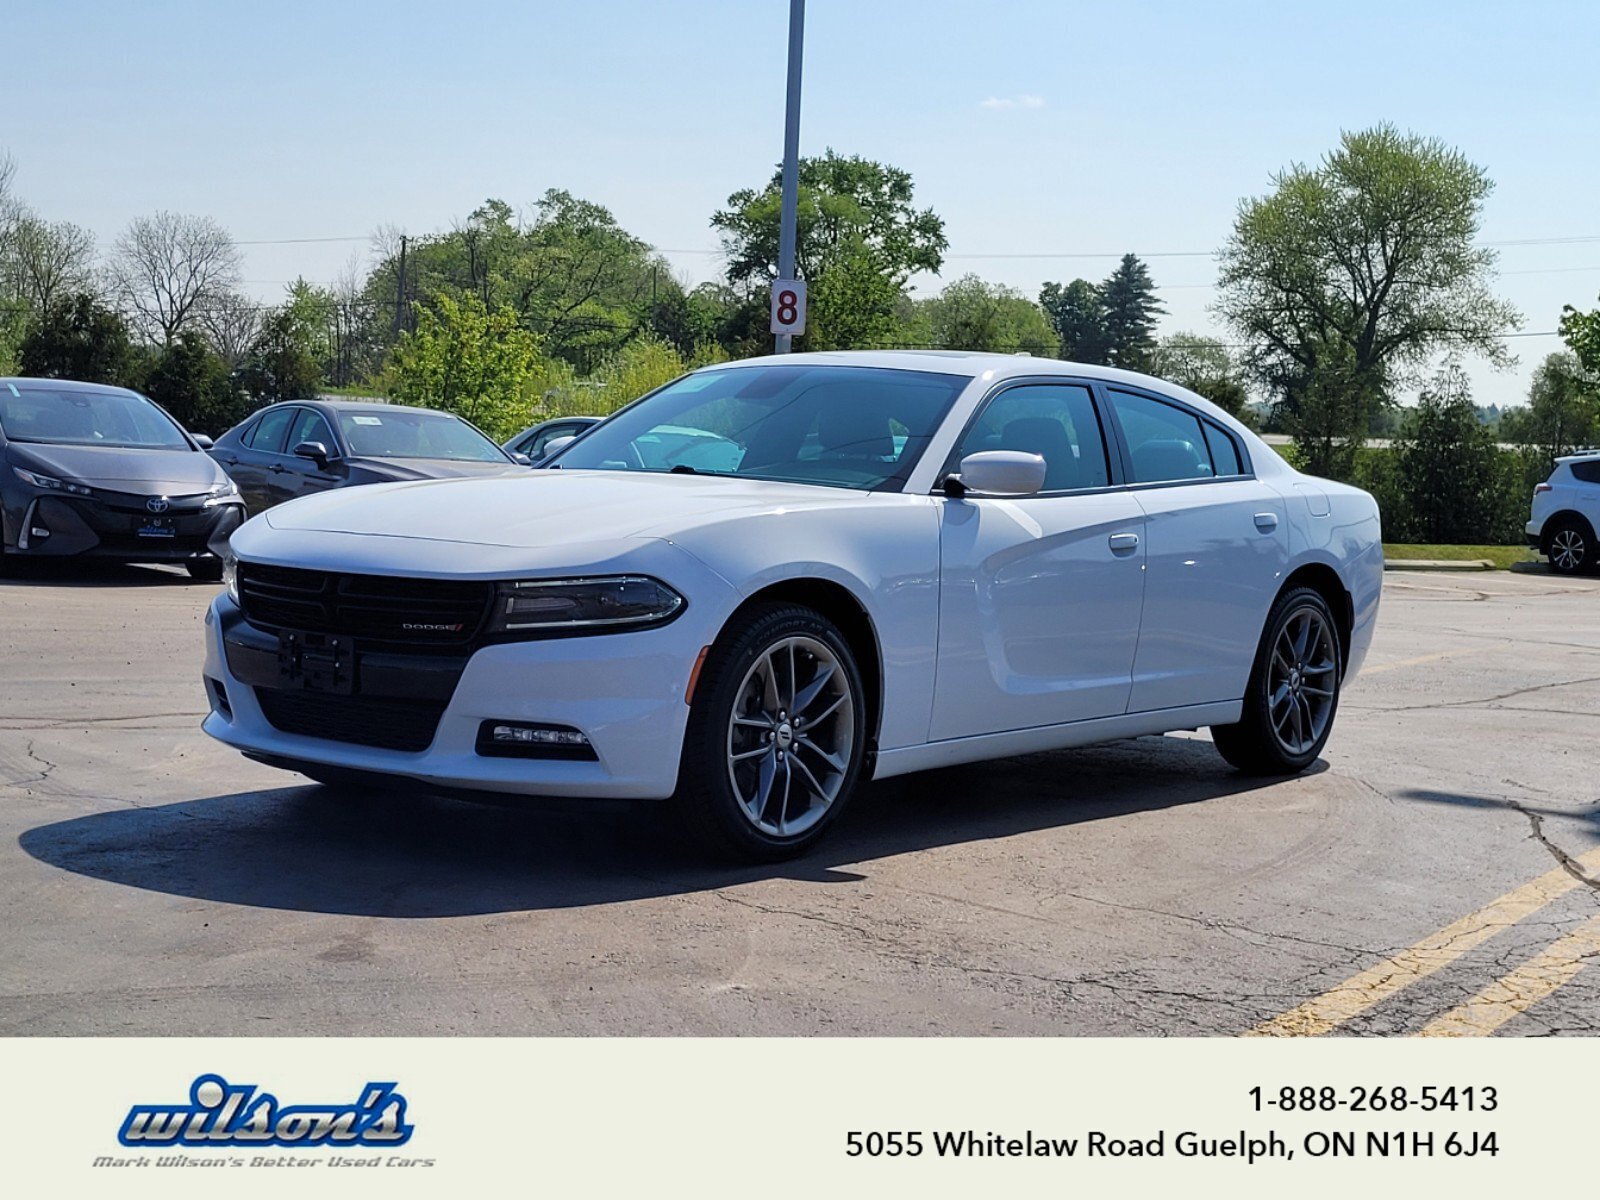 2021 Dodge Charger SXT Plus AWD, Leather, Sunroof, Nav, Cooled + Heat